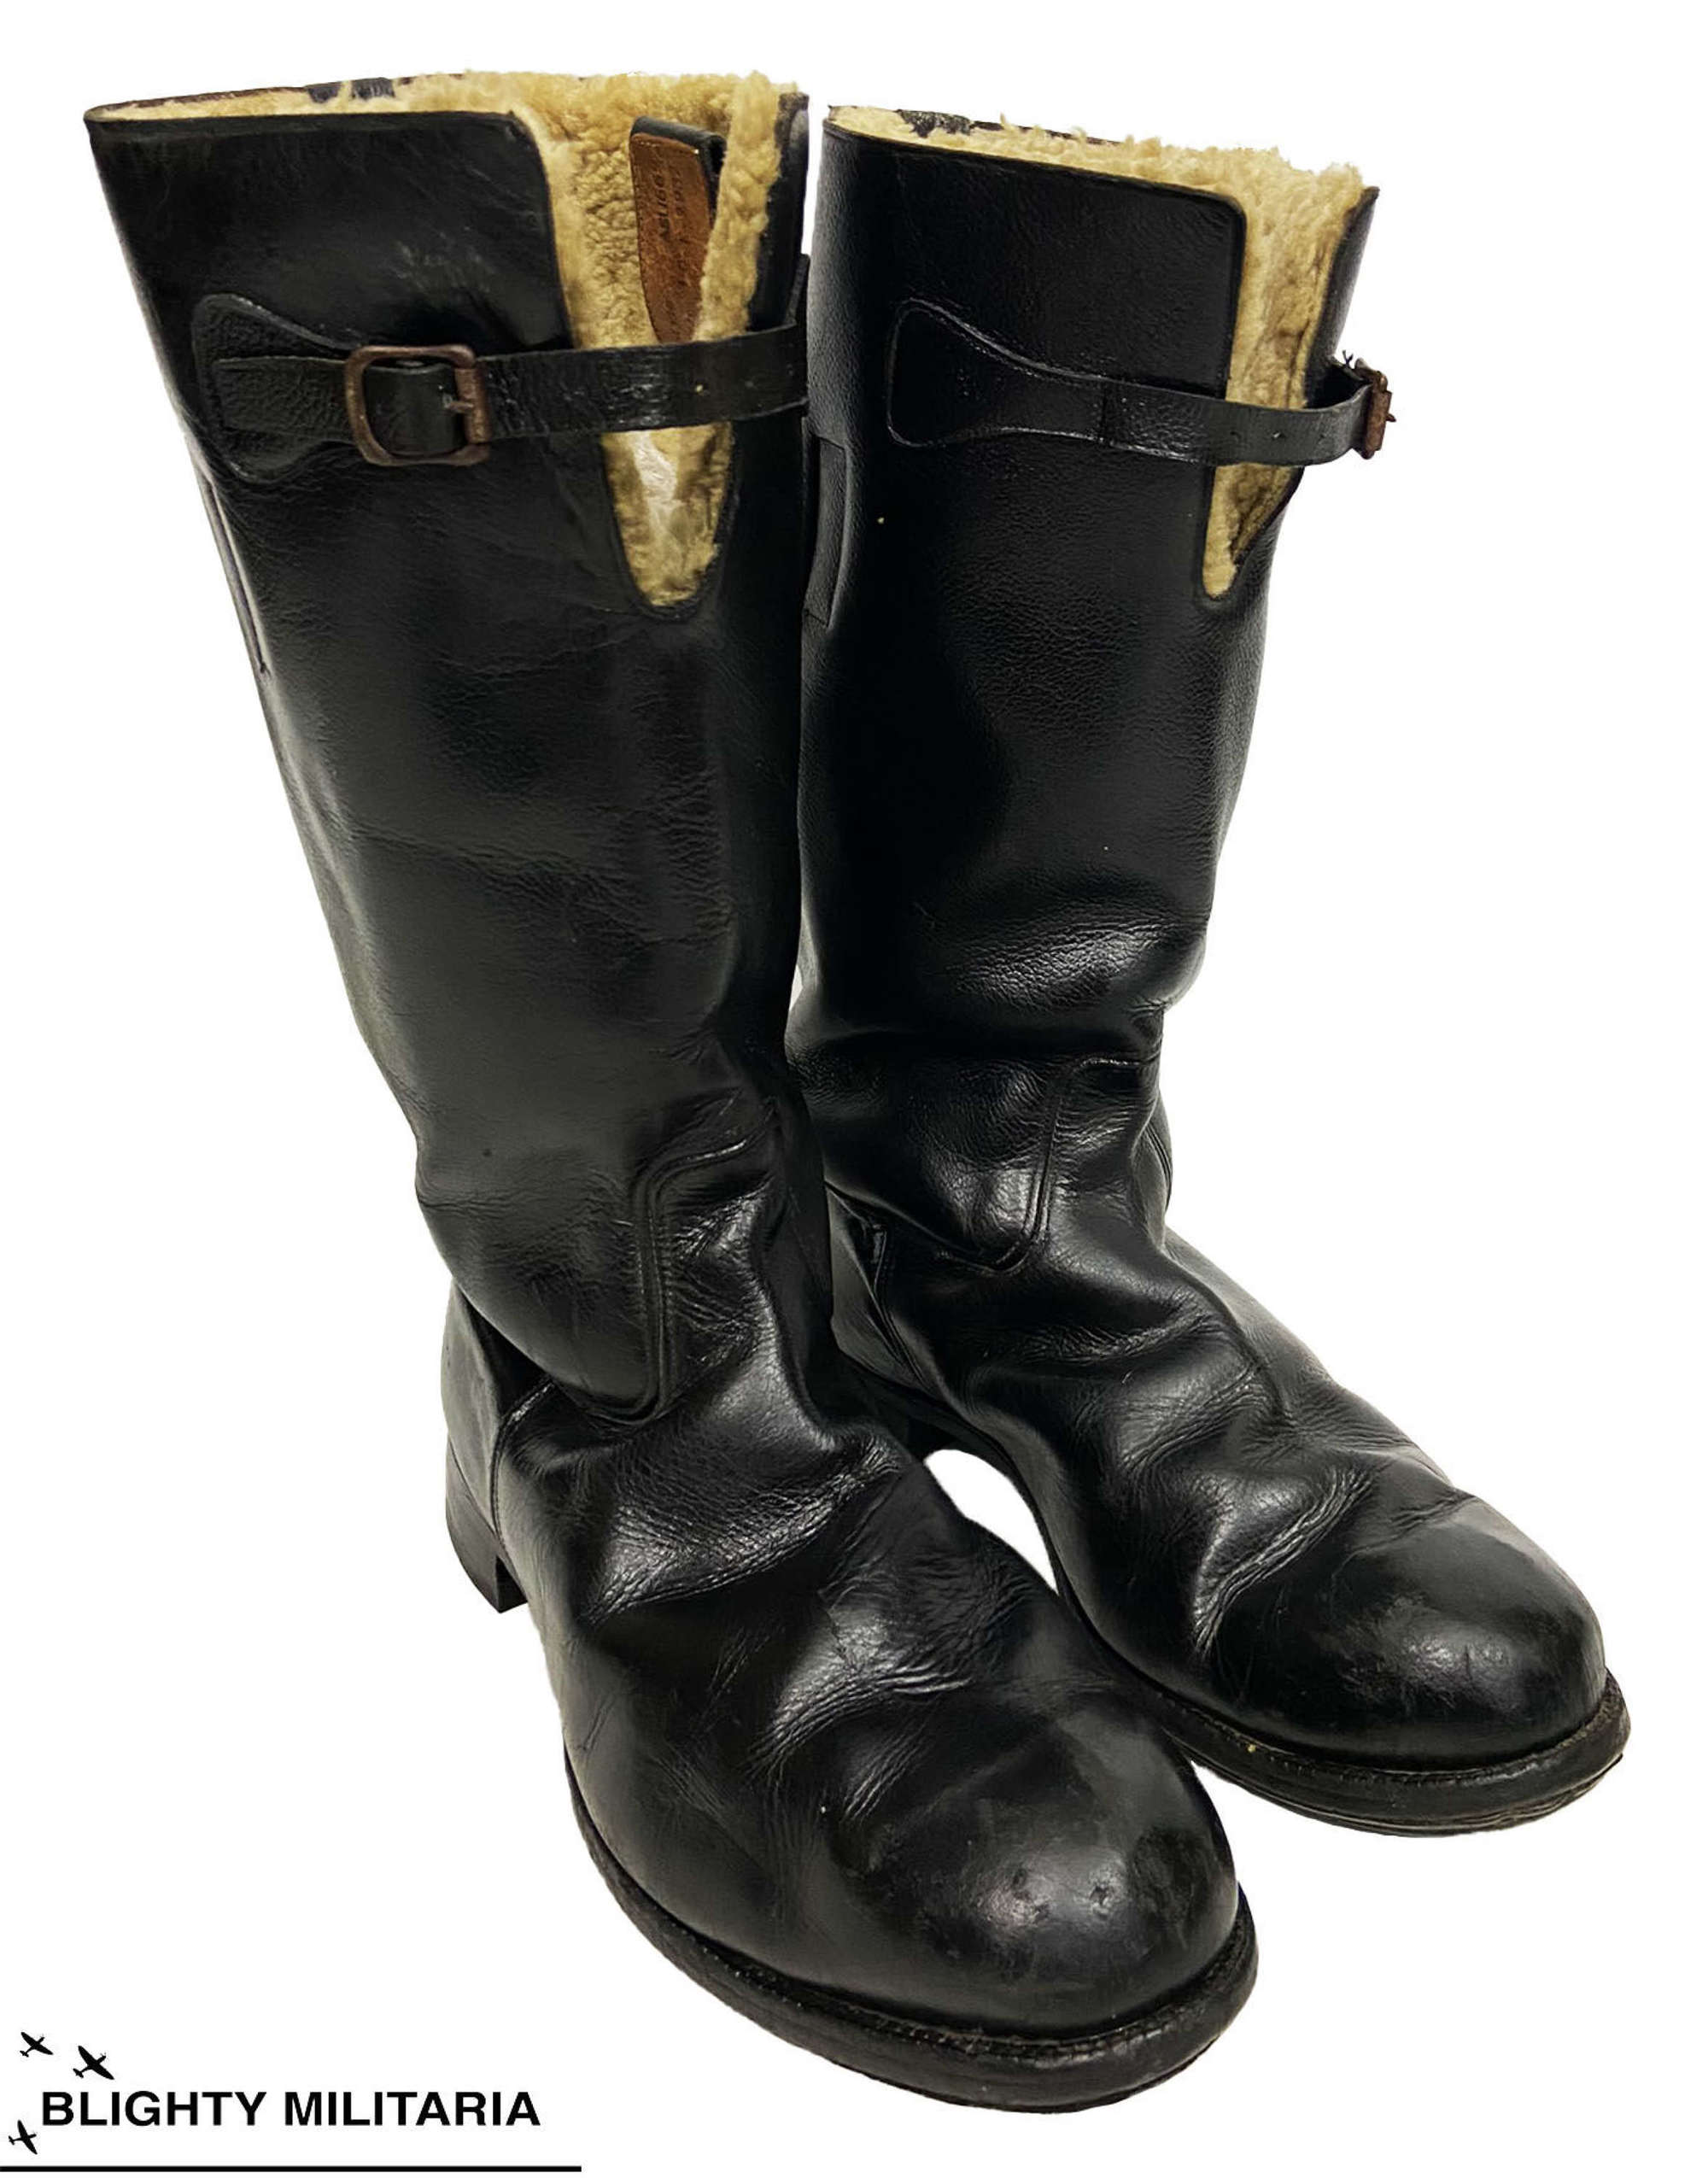 Original RAF Private Purchase 1936 Pattern Flying Boots - Size 10